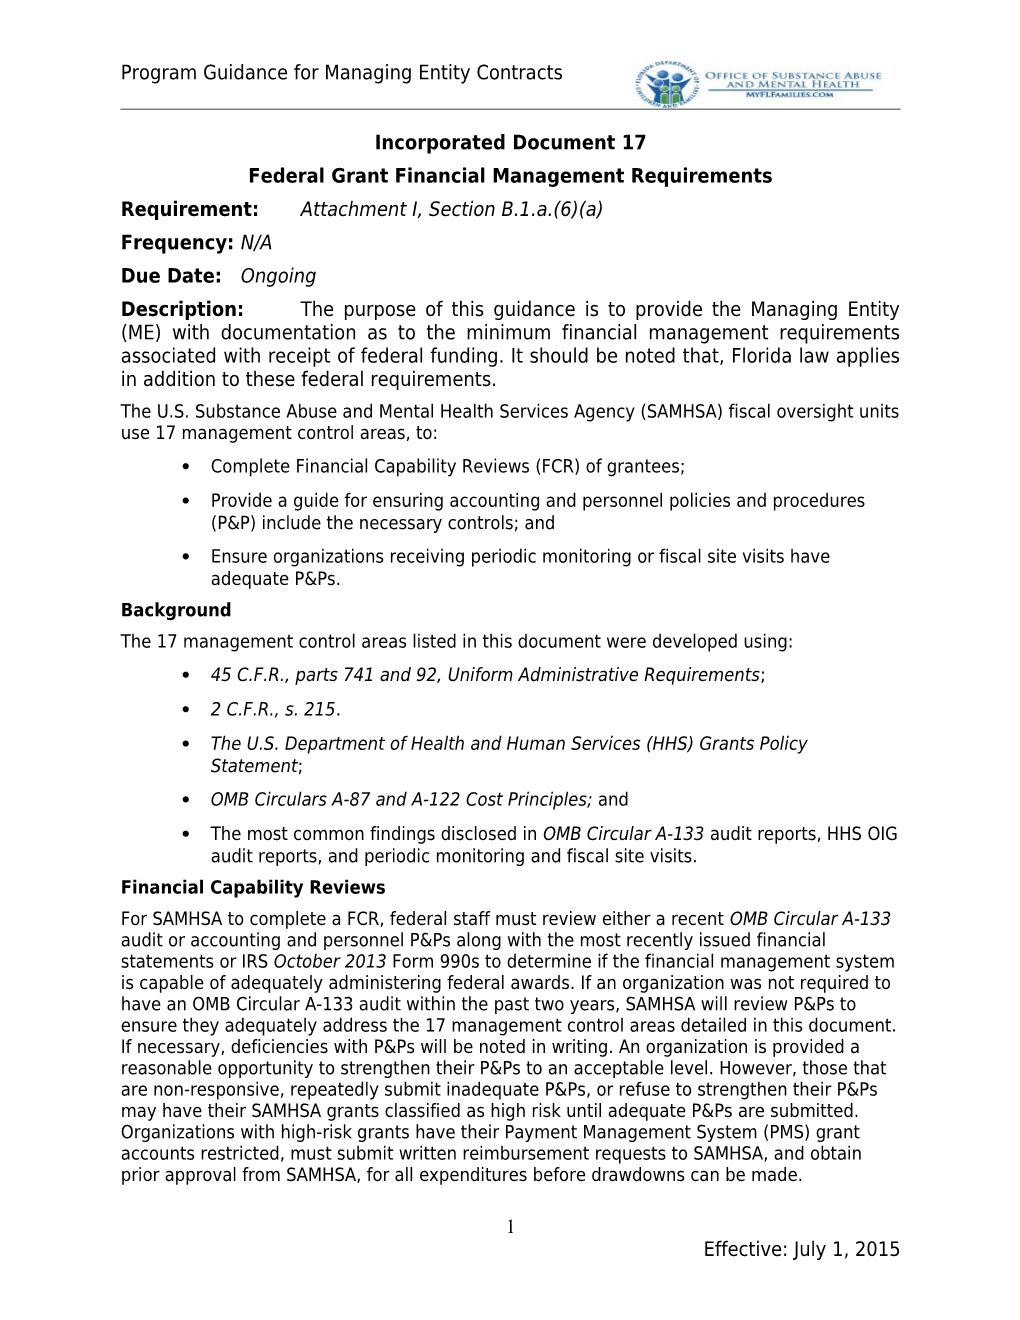 Federal Grant Financial Management Requirements